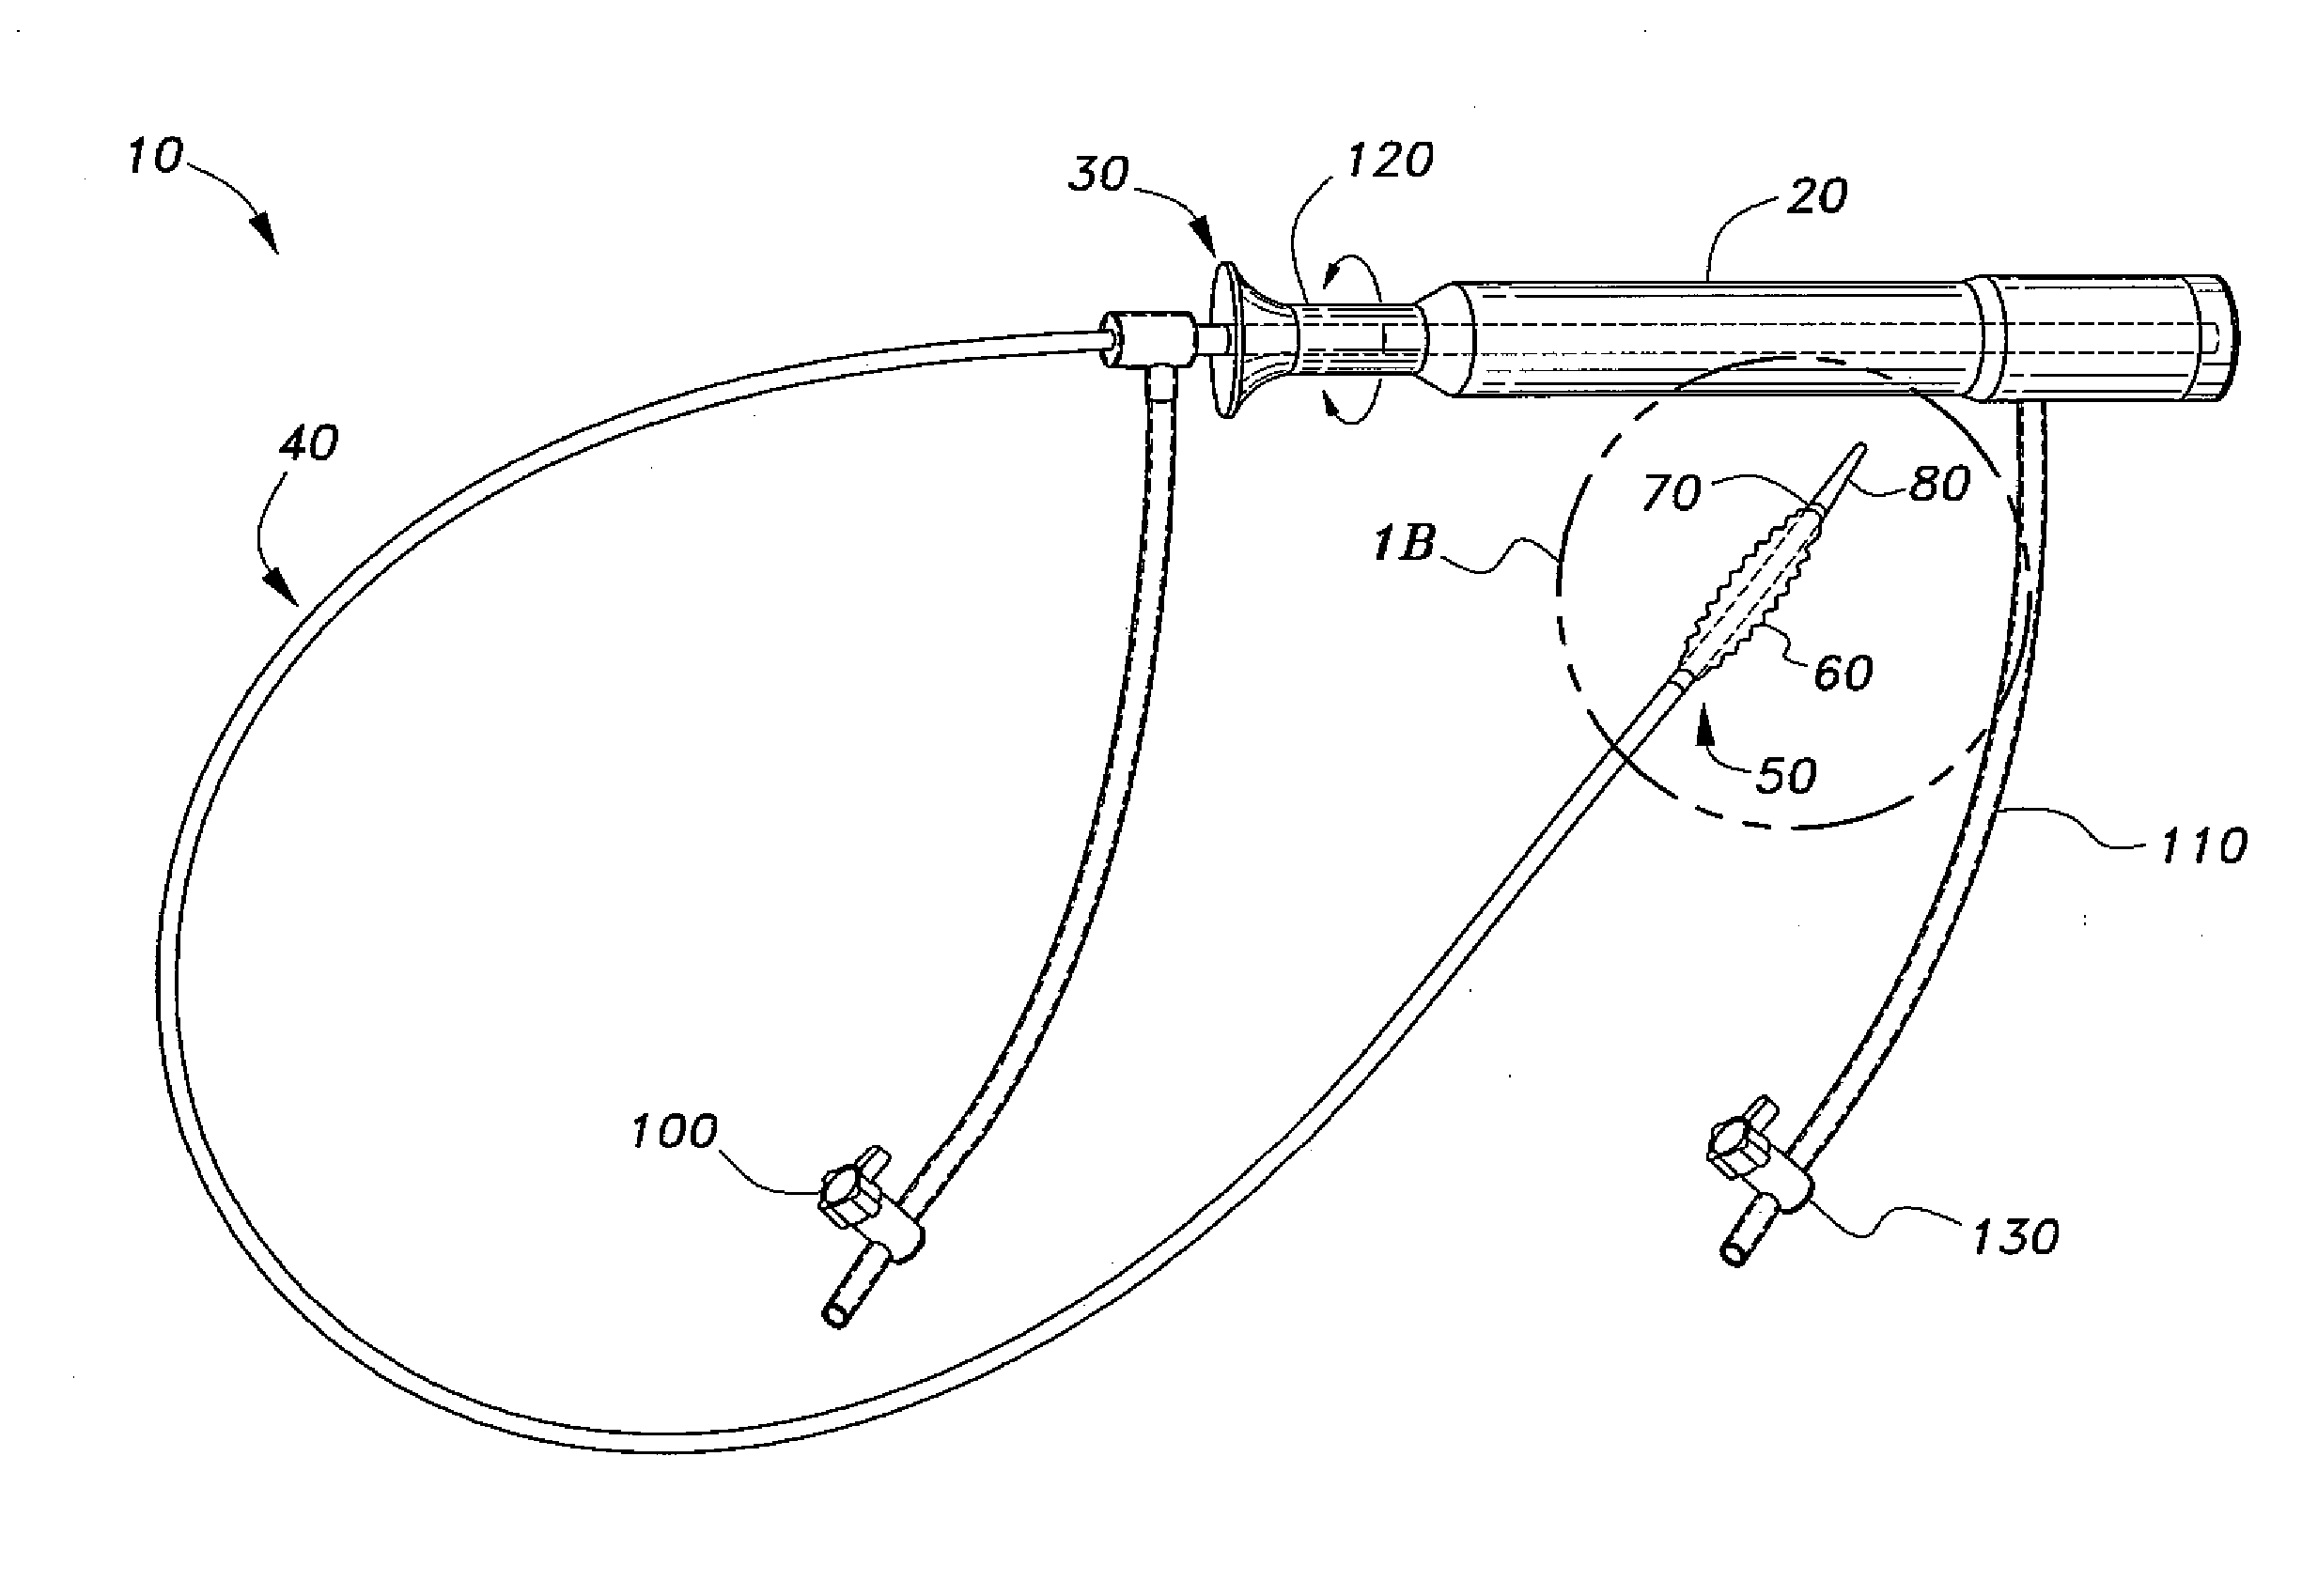 Apparatus for closure of atrial septal defects